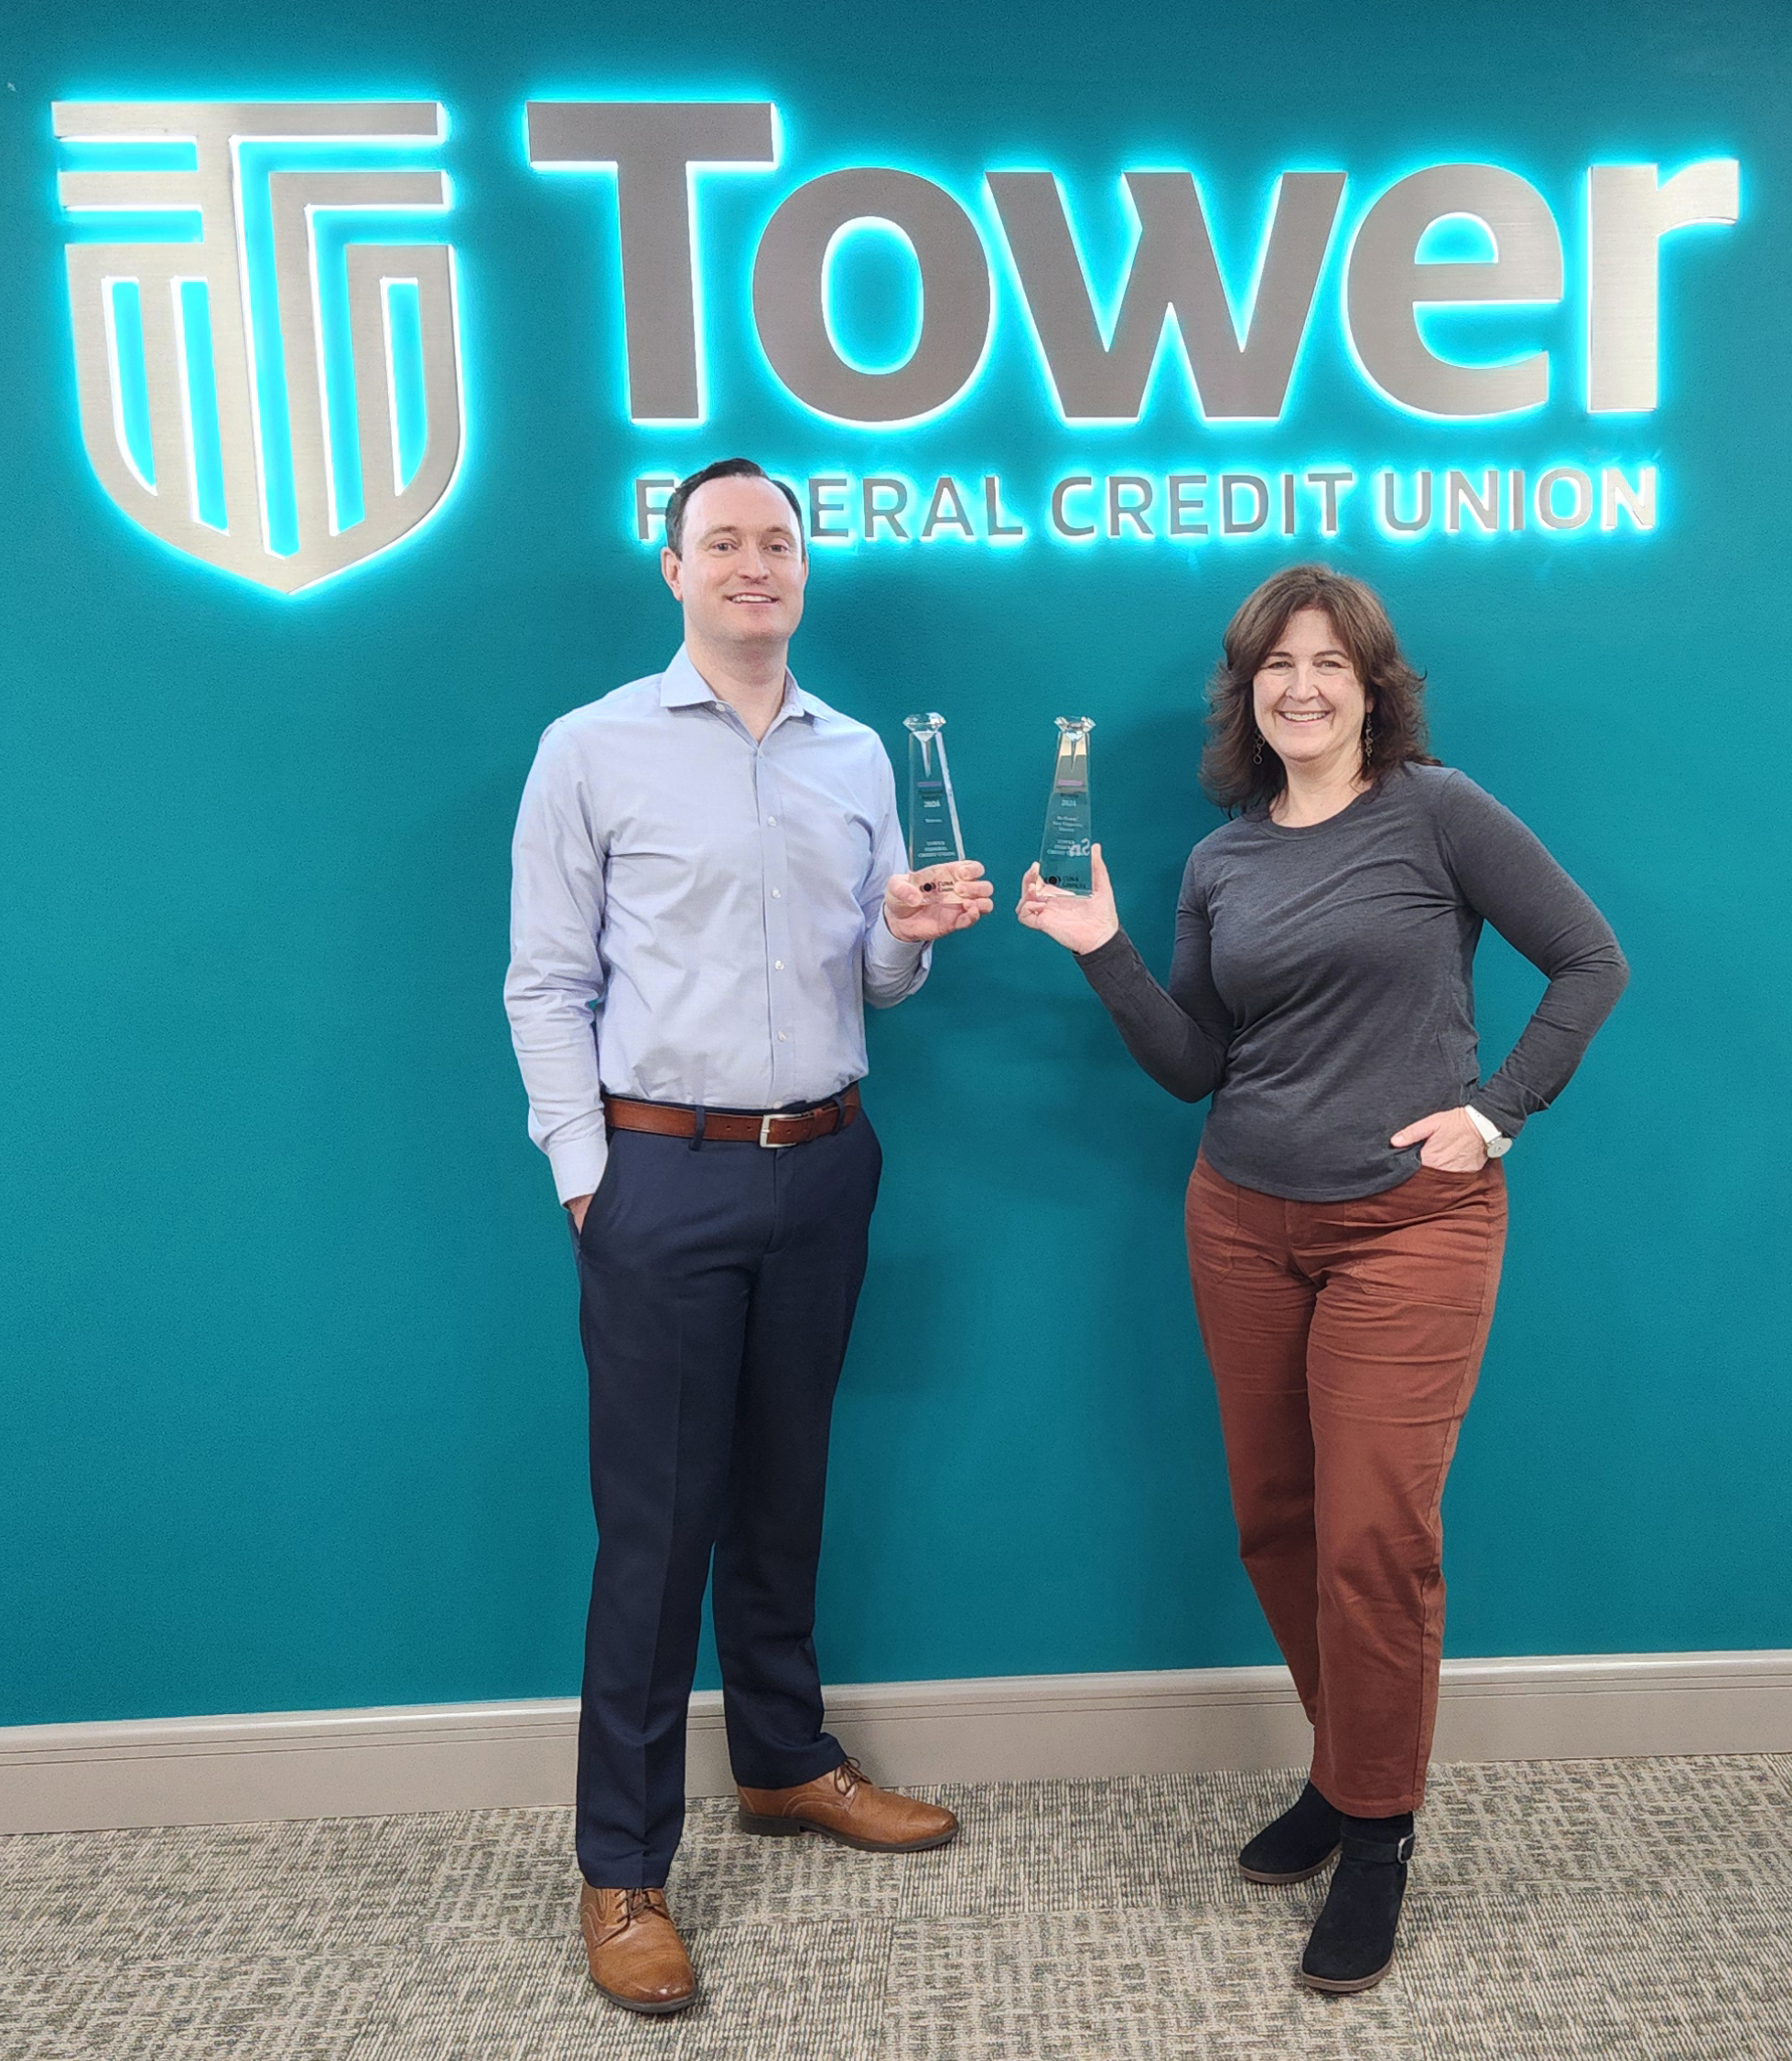 Tower Federal Credit Union Wins Two CUNA Diamond Awards For Creative Excellence in Marketing